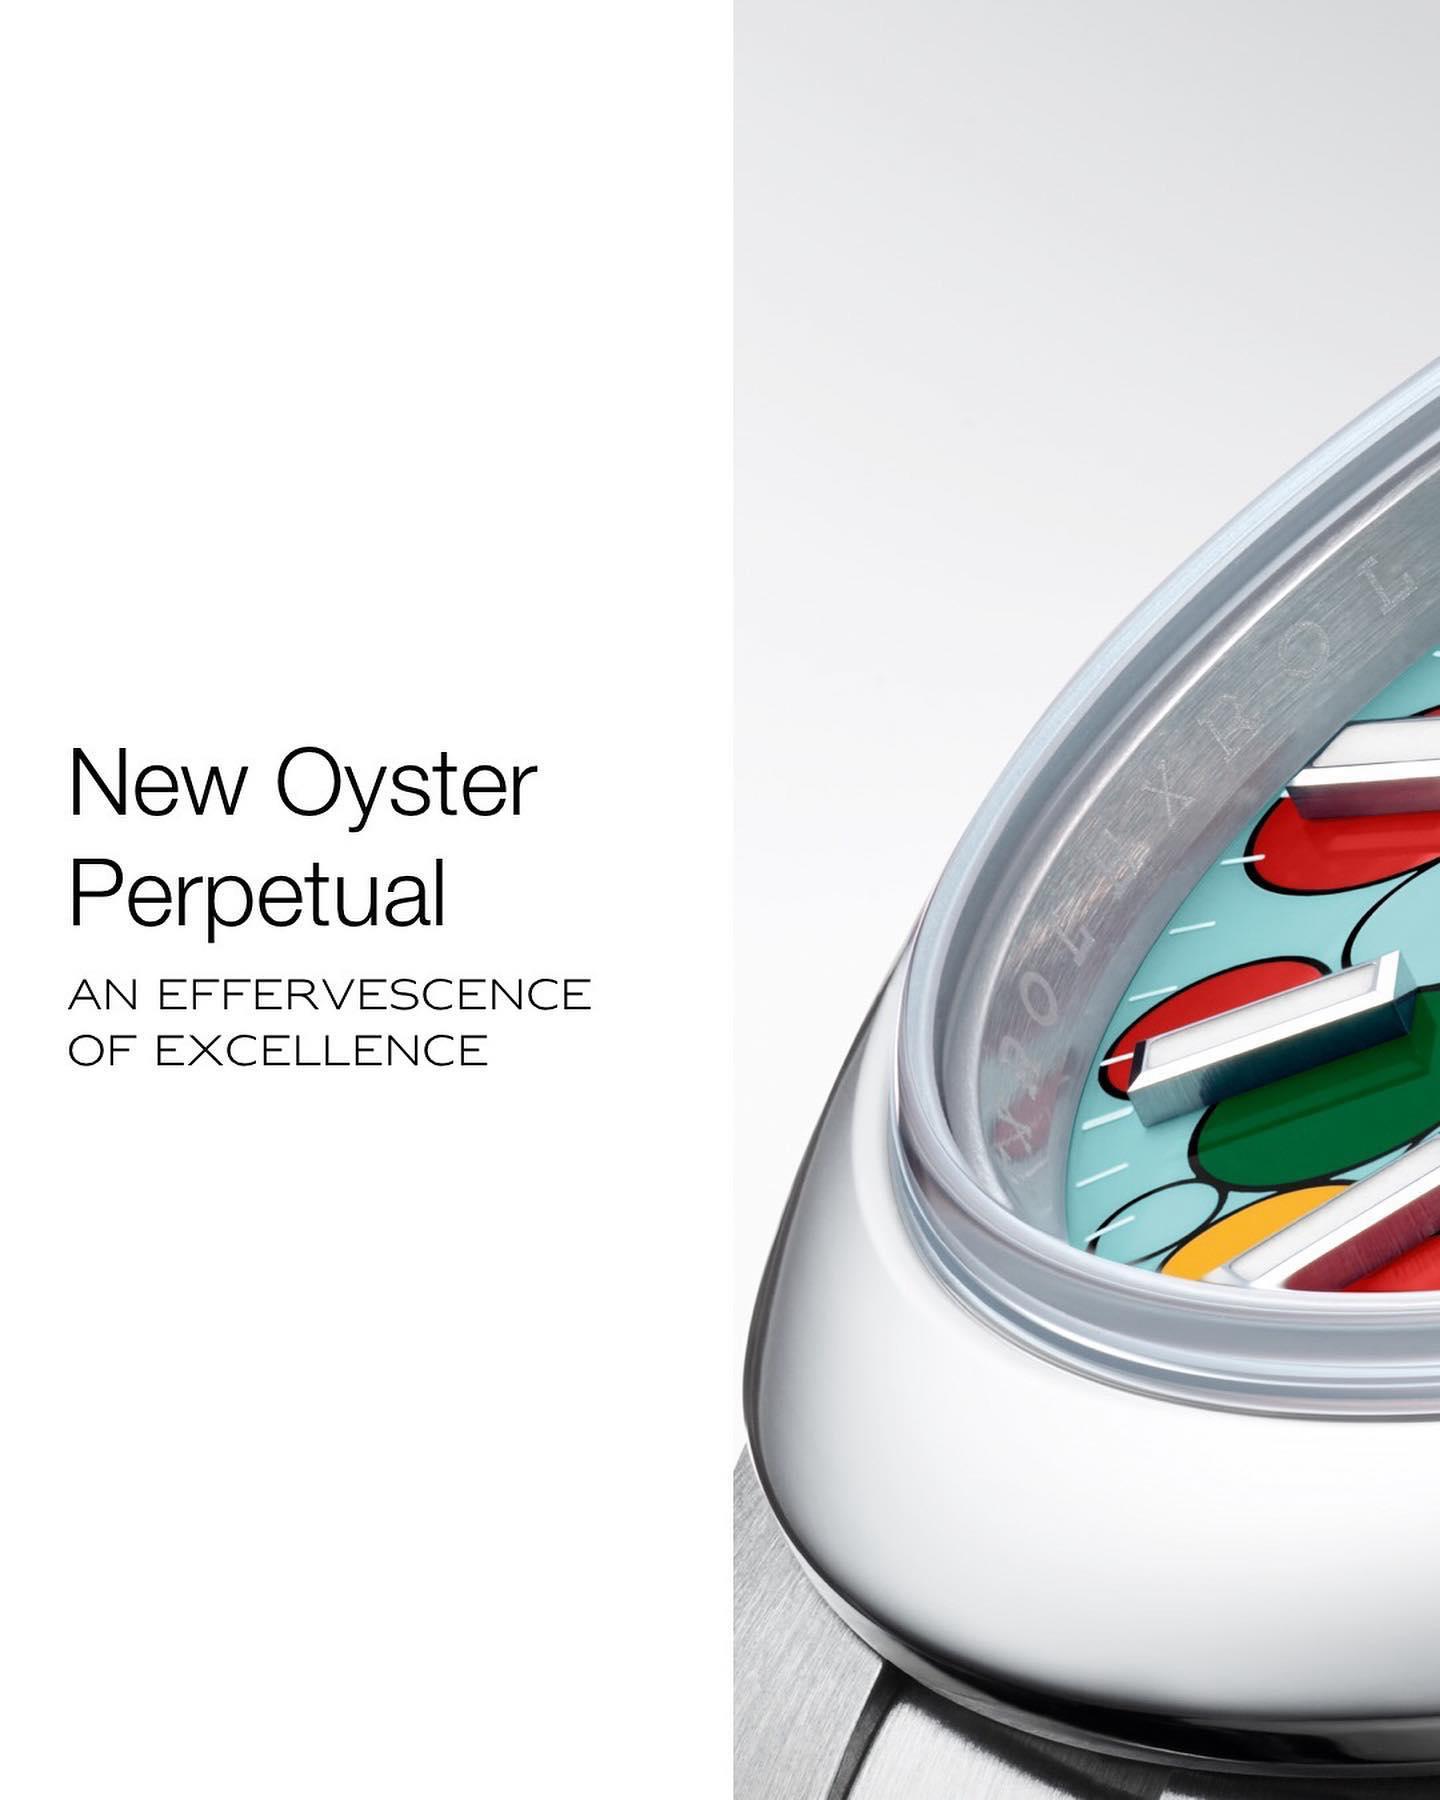 image  1 The new dial motif of the Oyster Perpetual is composed of differently sized bubbles fringed with bla